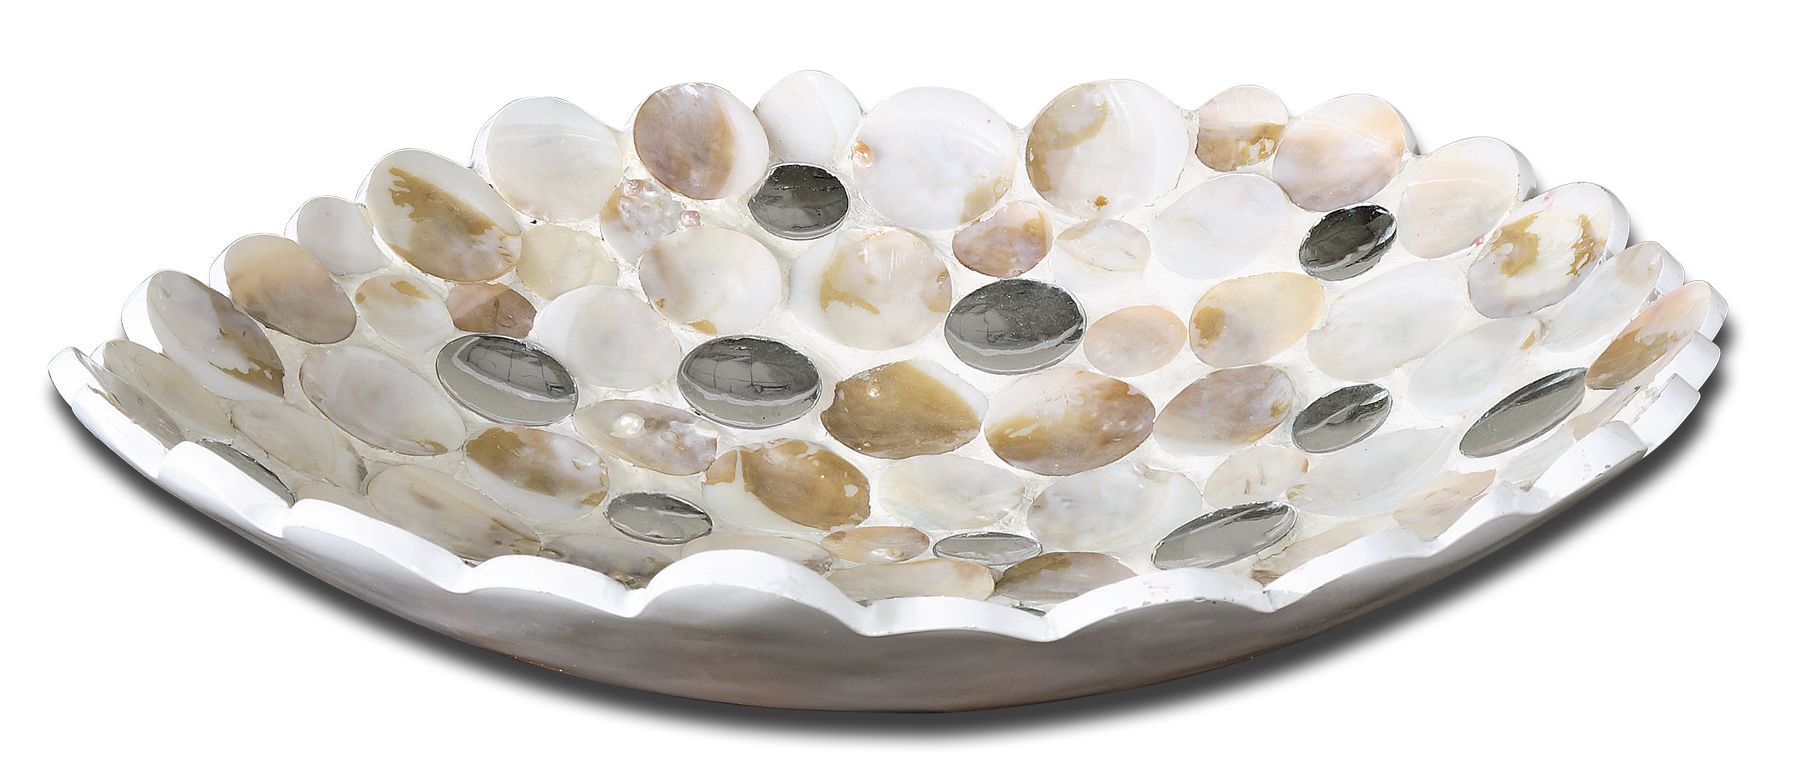 Uttermost 19617 Capiz Shell Accented Bowl